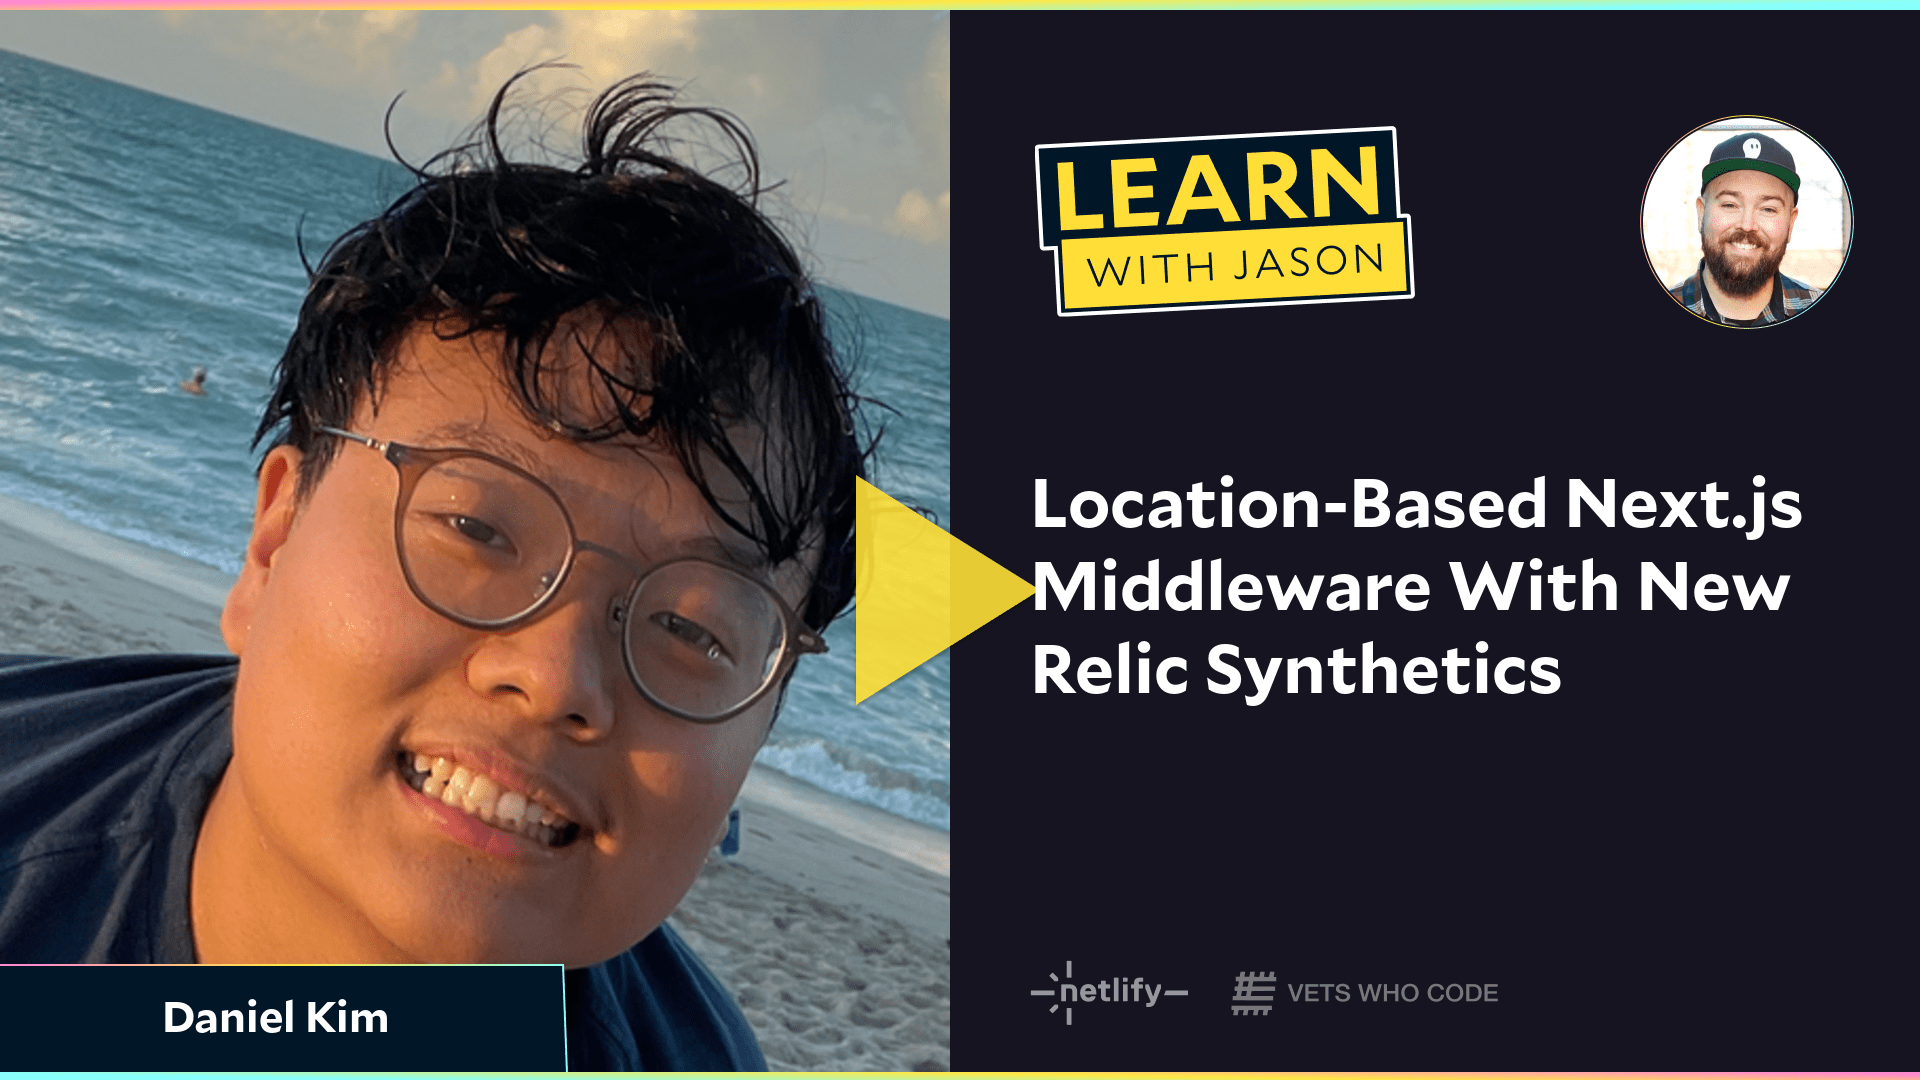 Location-Based Next.js Middleware With New Relic Synthetics (with Daniel Kim)